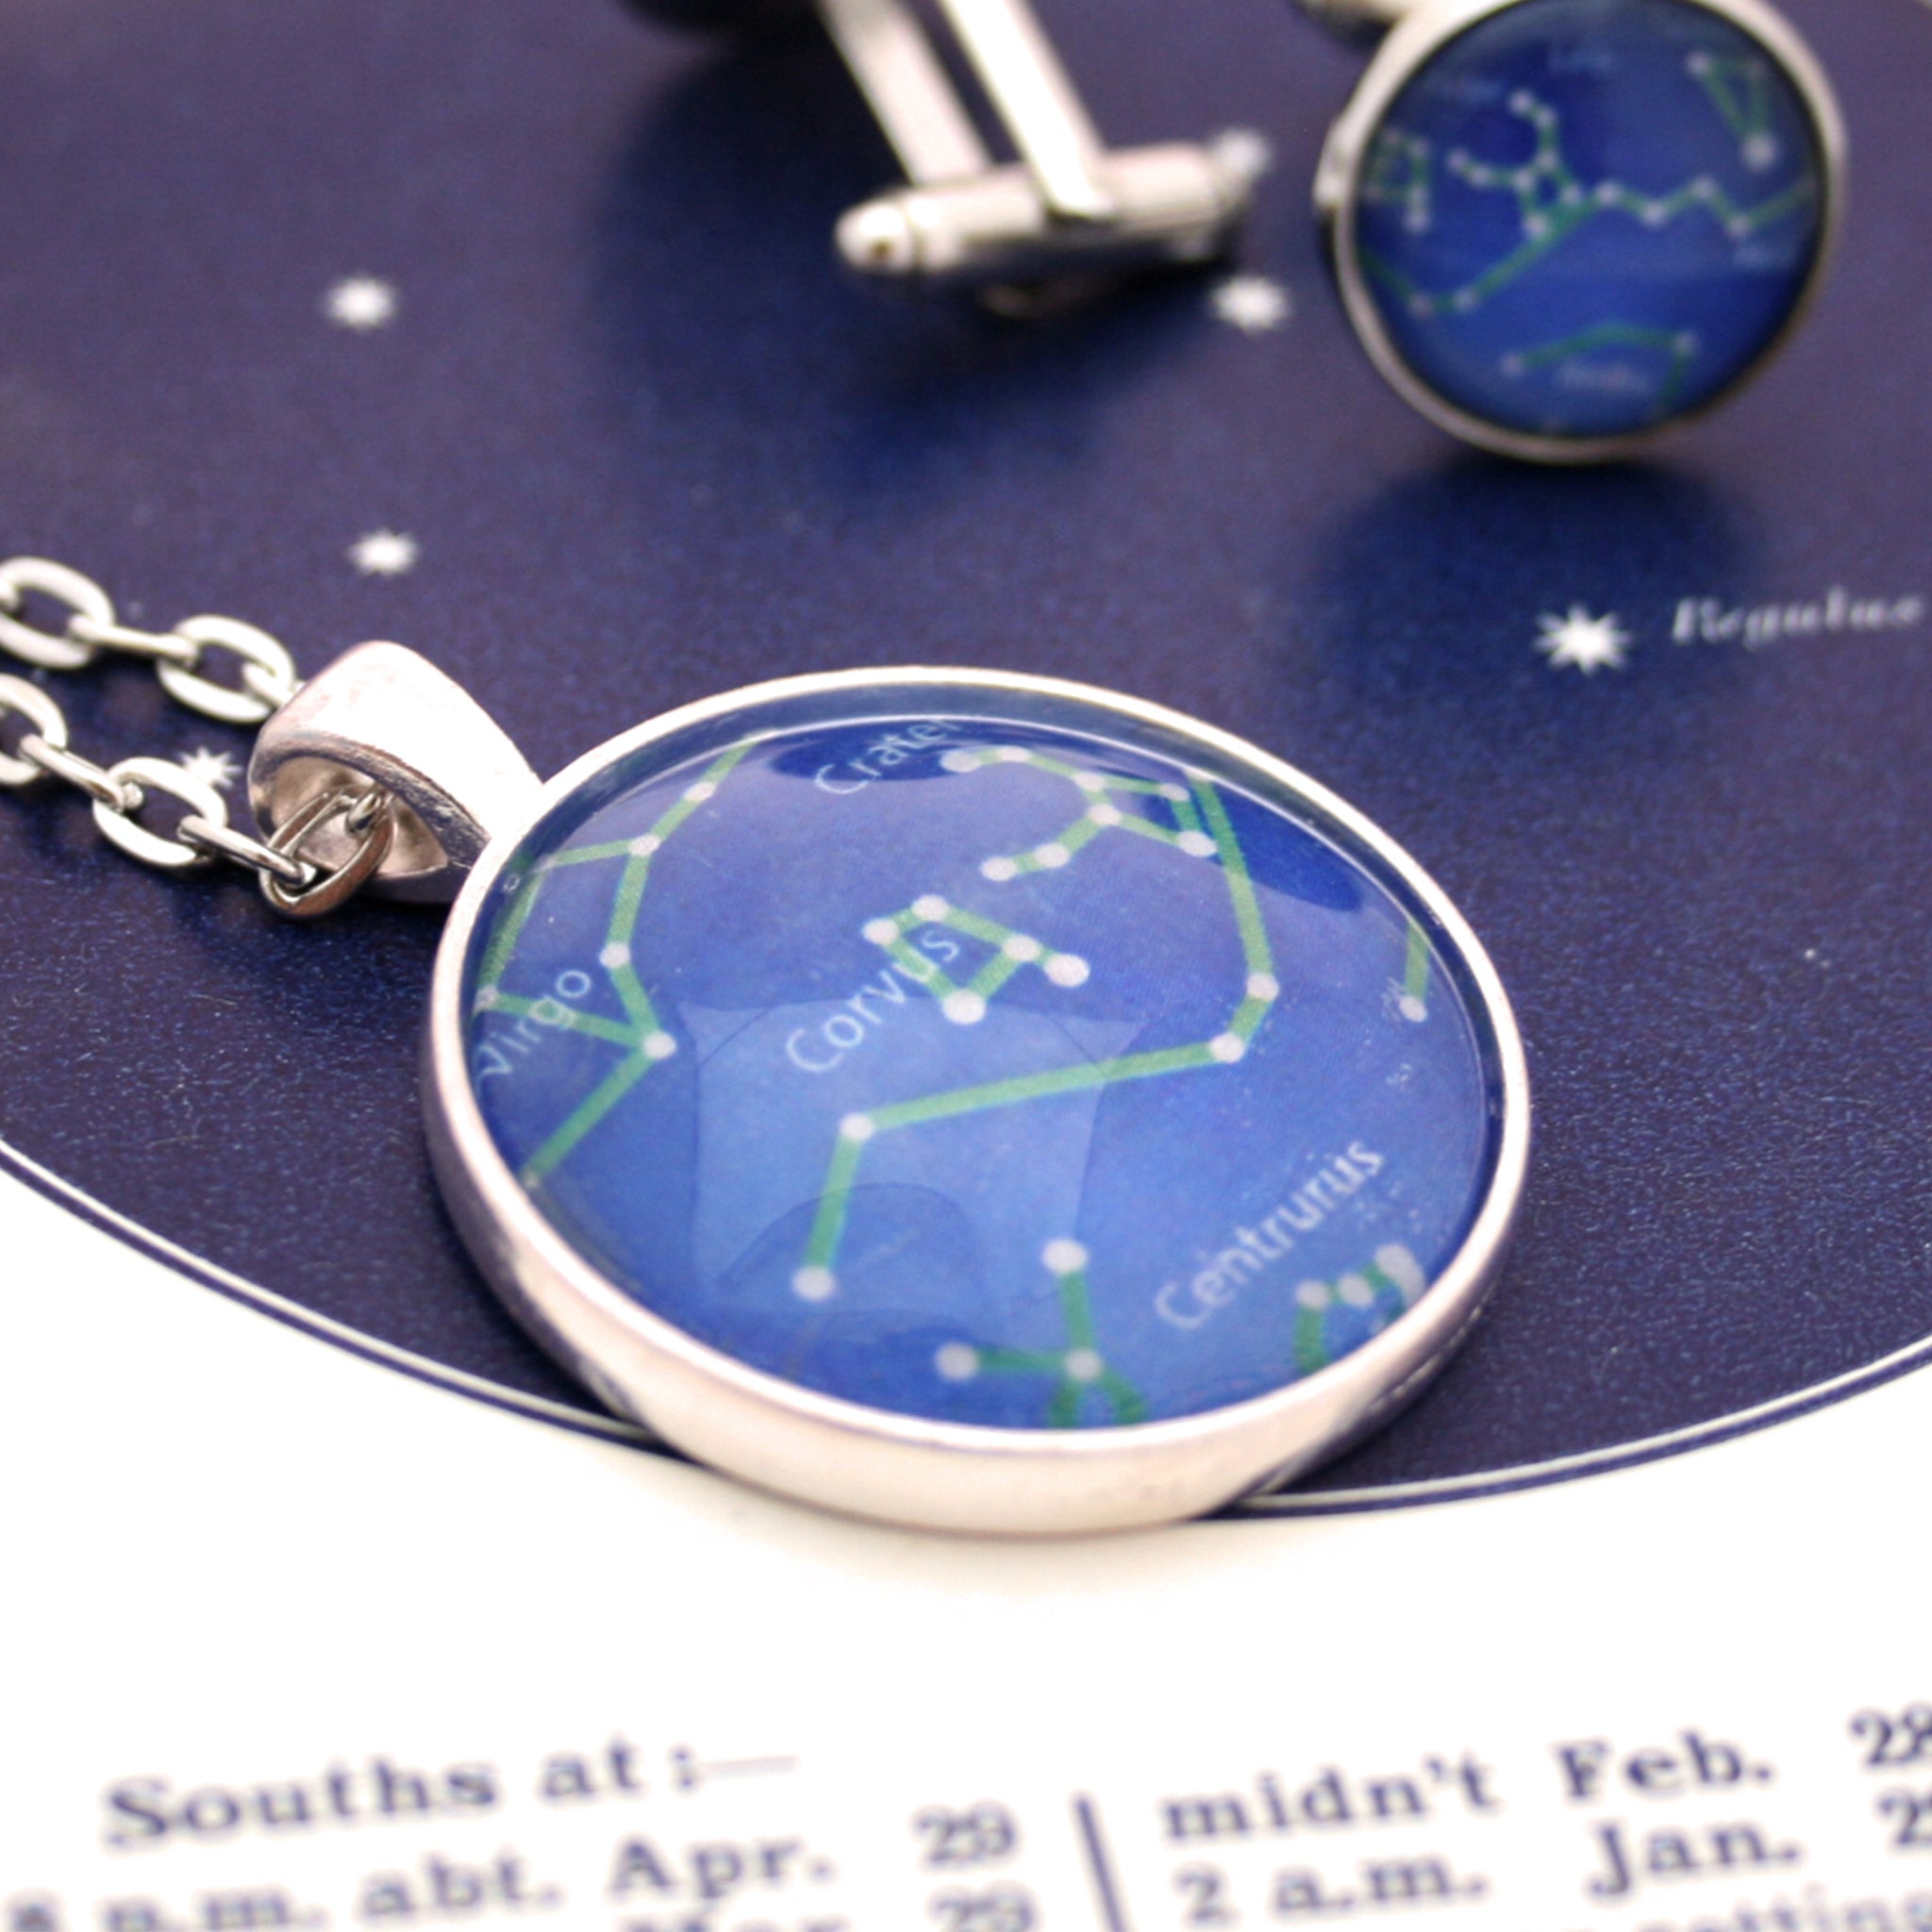 bespoke celestial necklace with map of heaven from given date and place